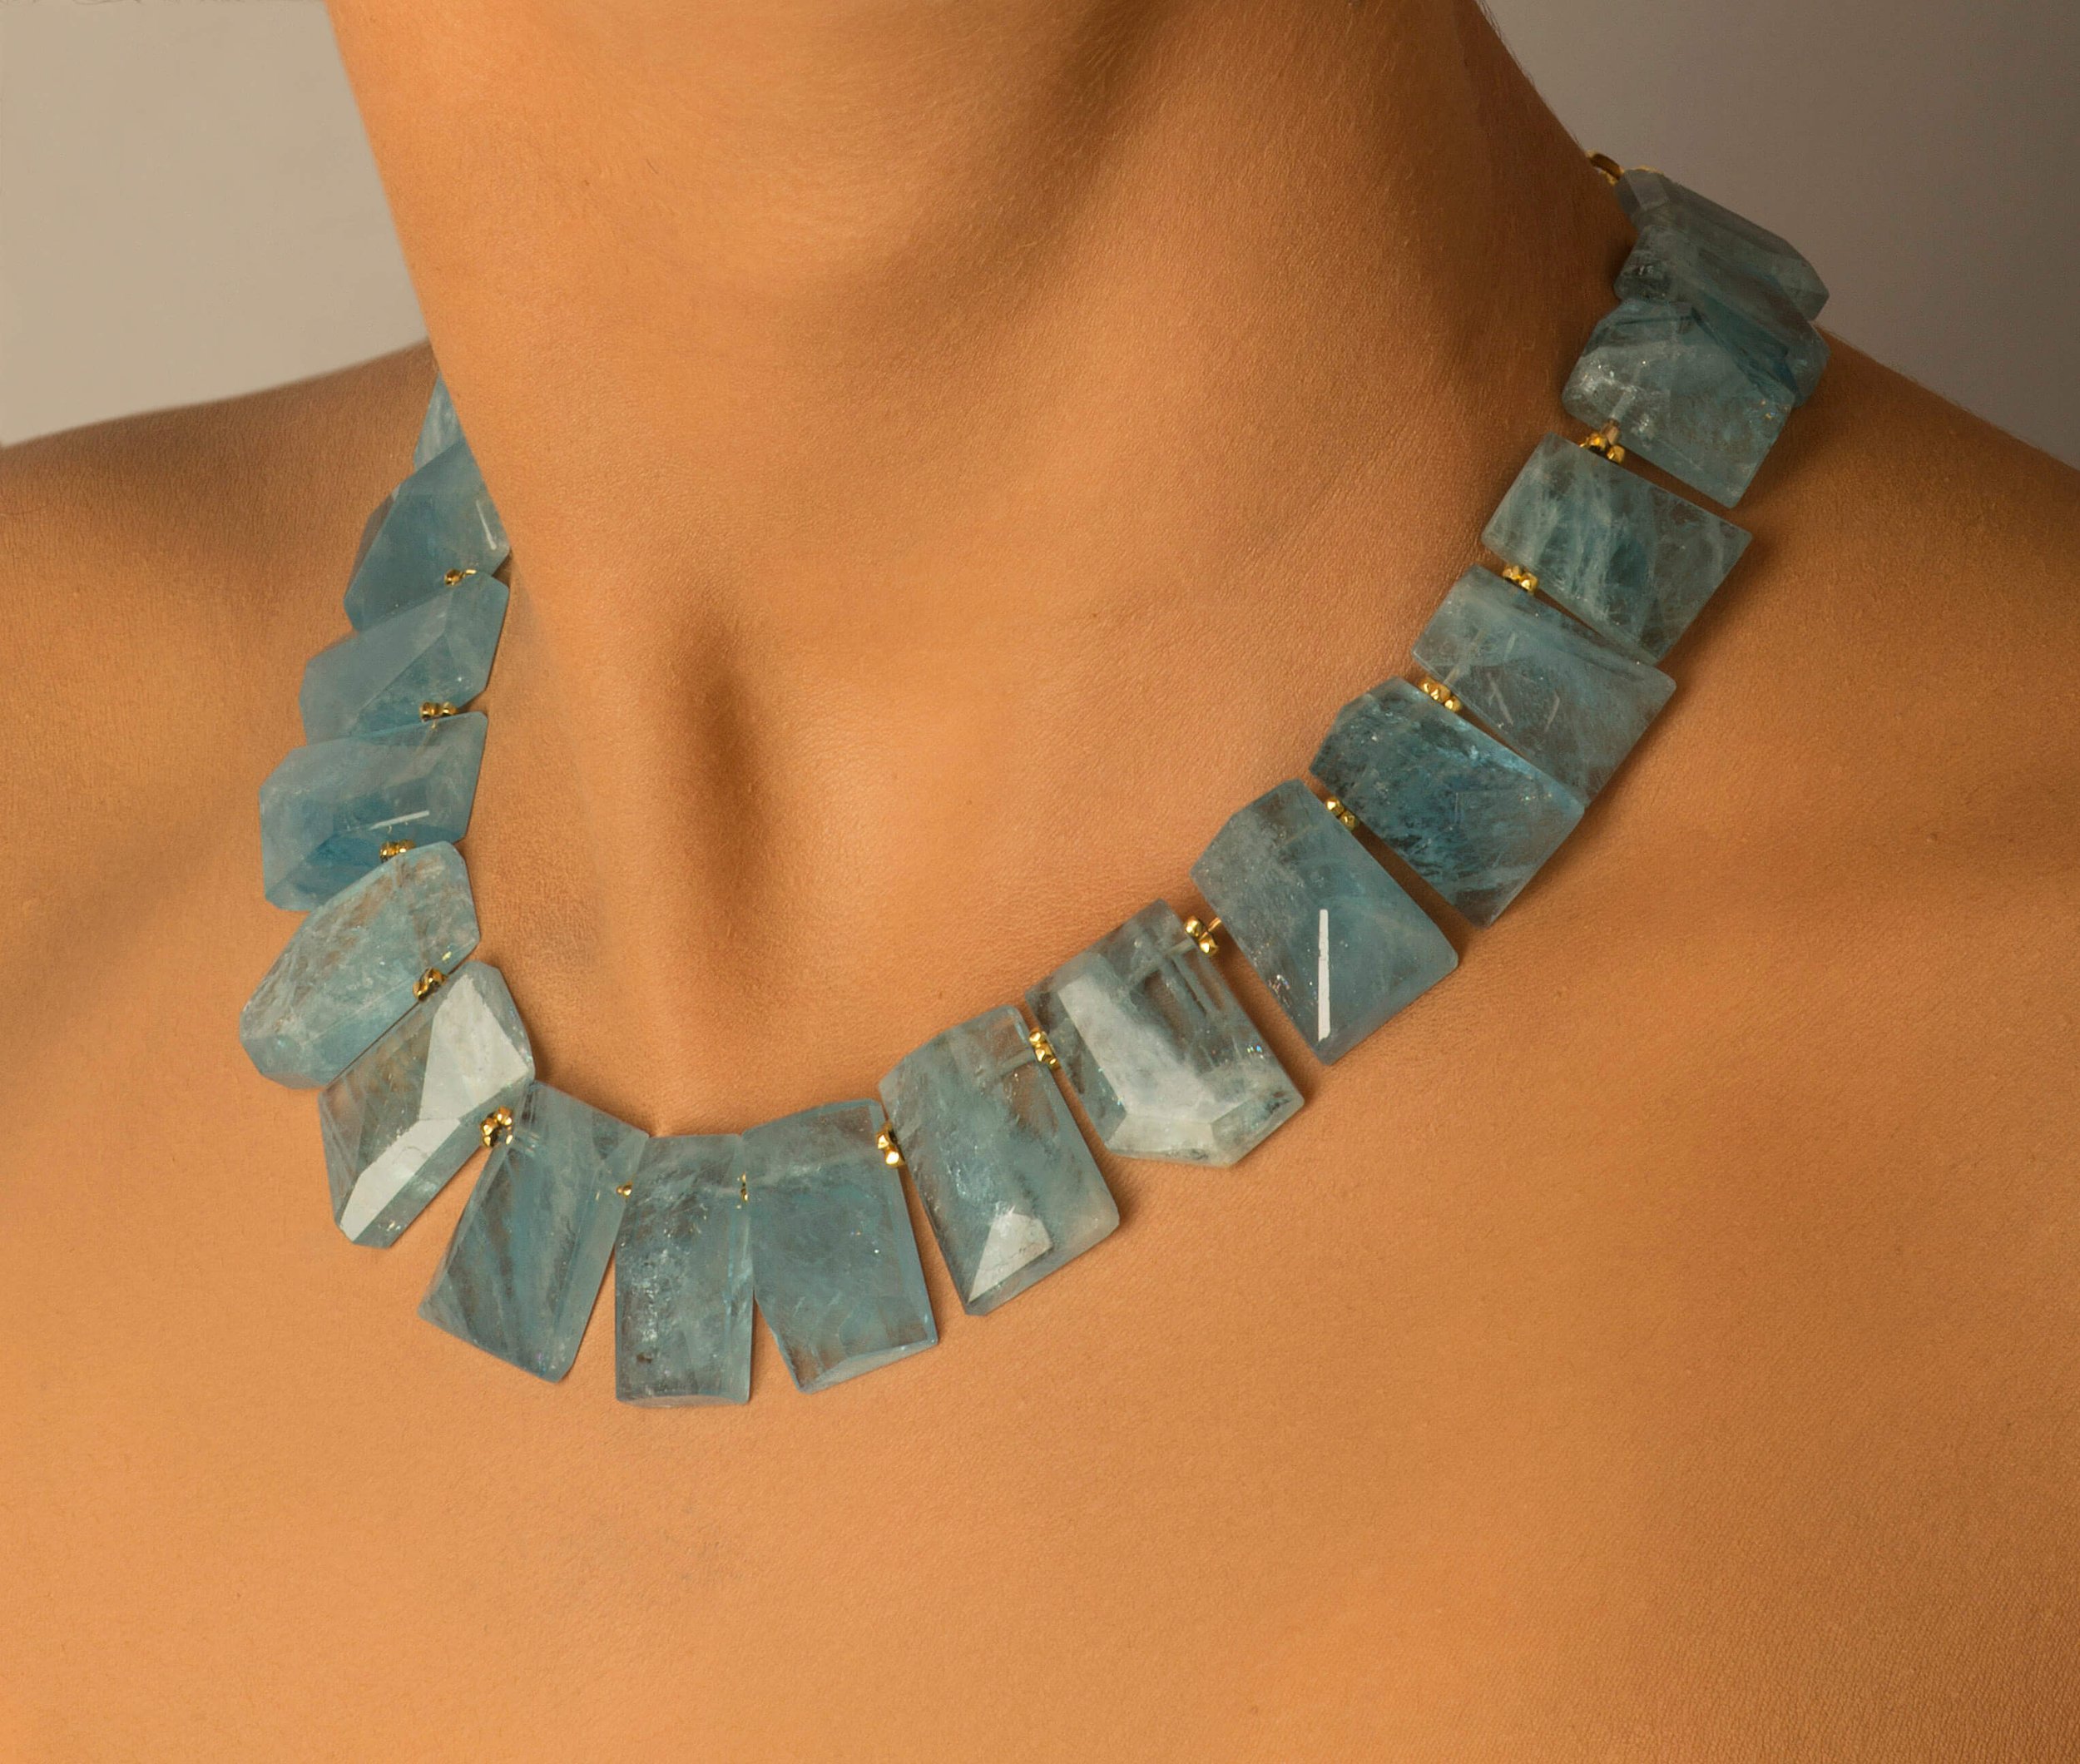 Aqua Collar. This collar is strung with large aquamarine faceted stones; tiny, round 14k beads are placed in between each of the stones.